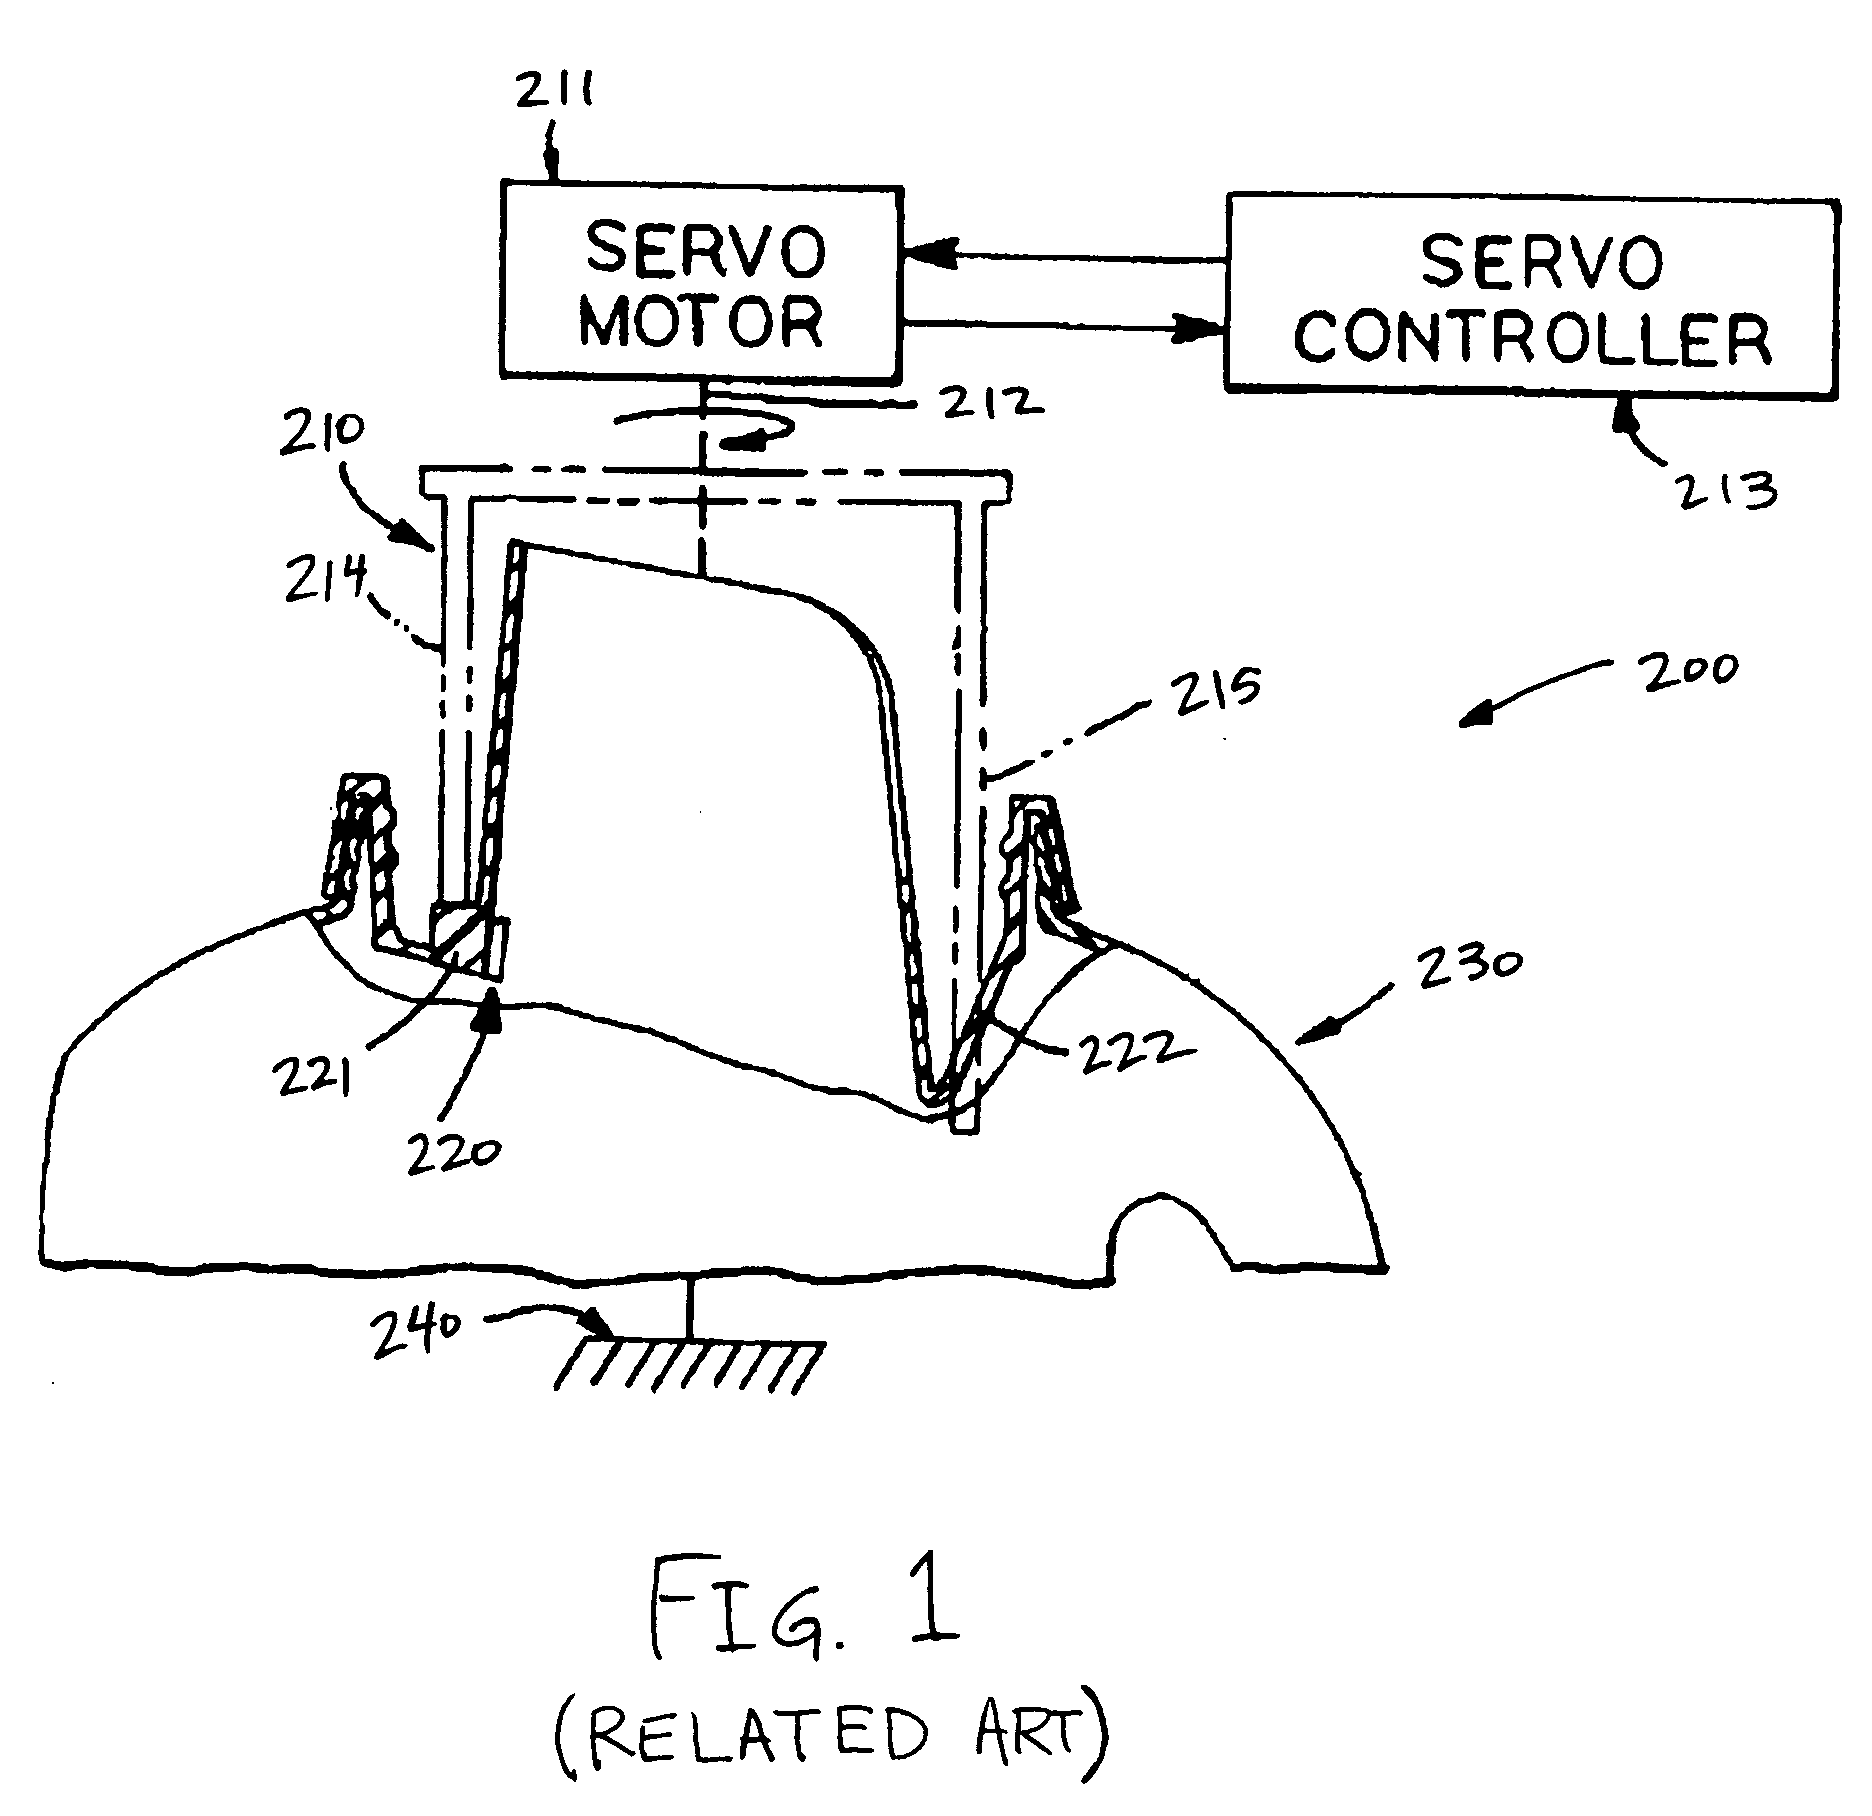 Continuous motion spin welding apparatus, system, and method